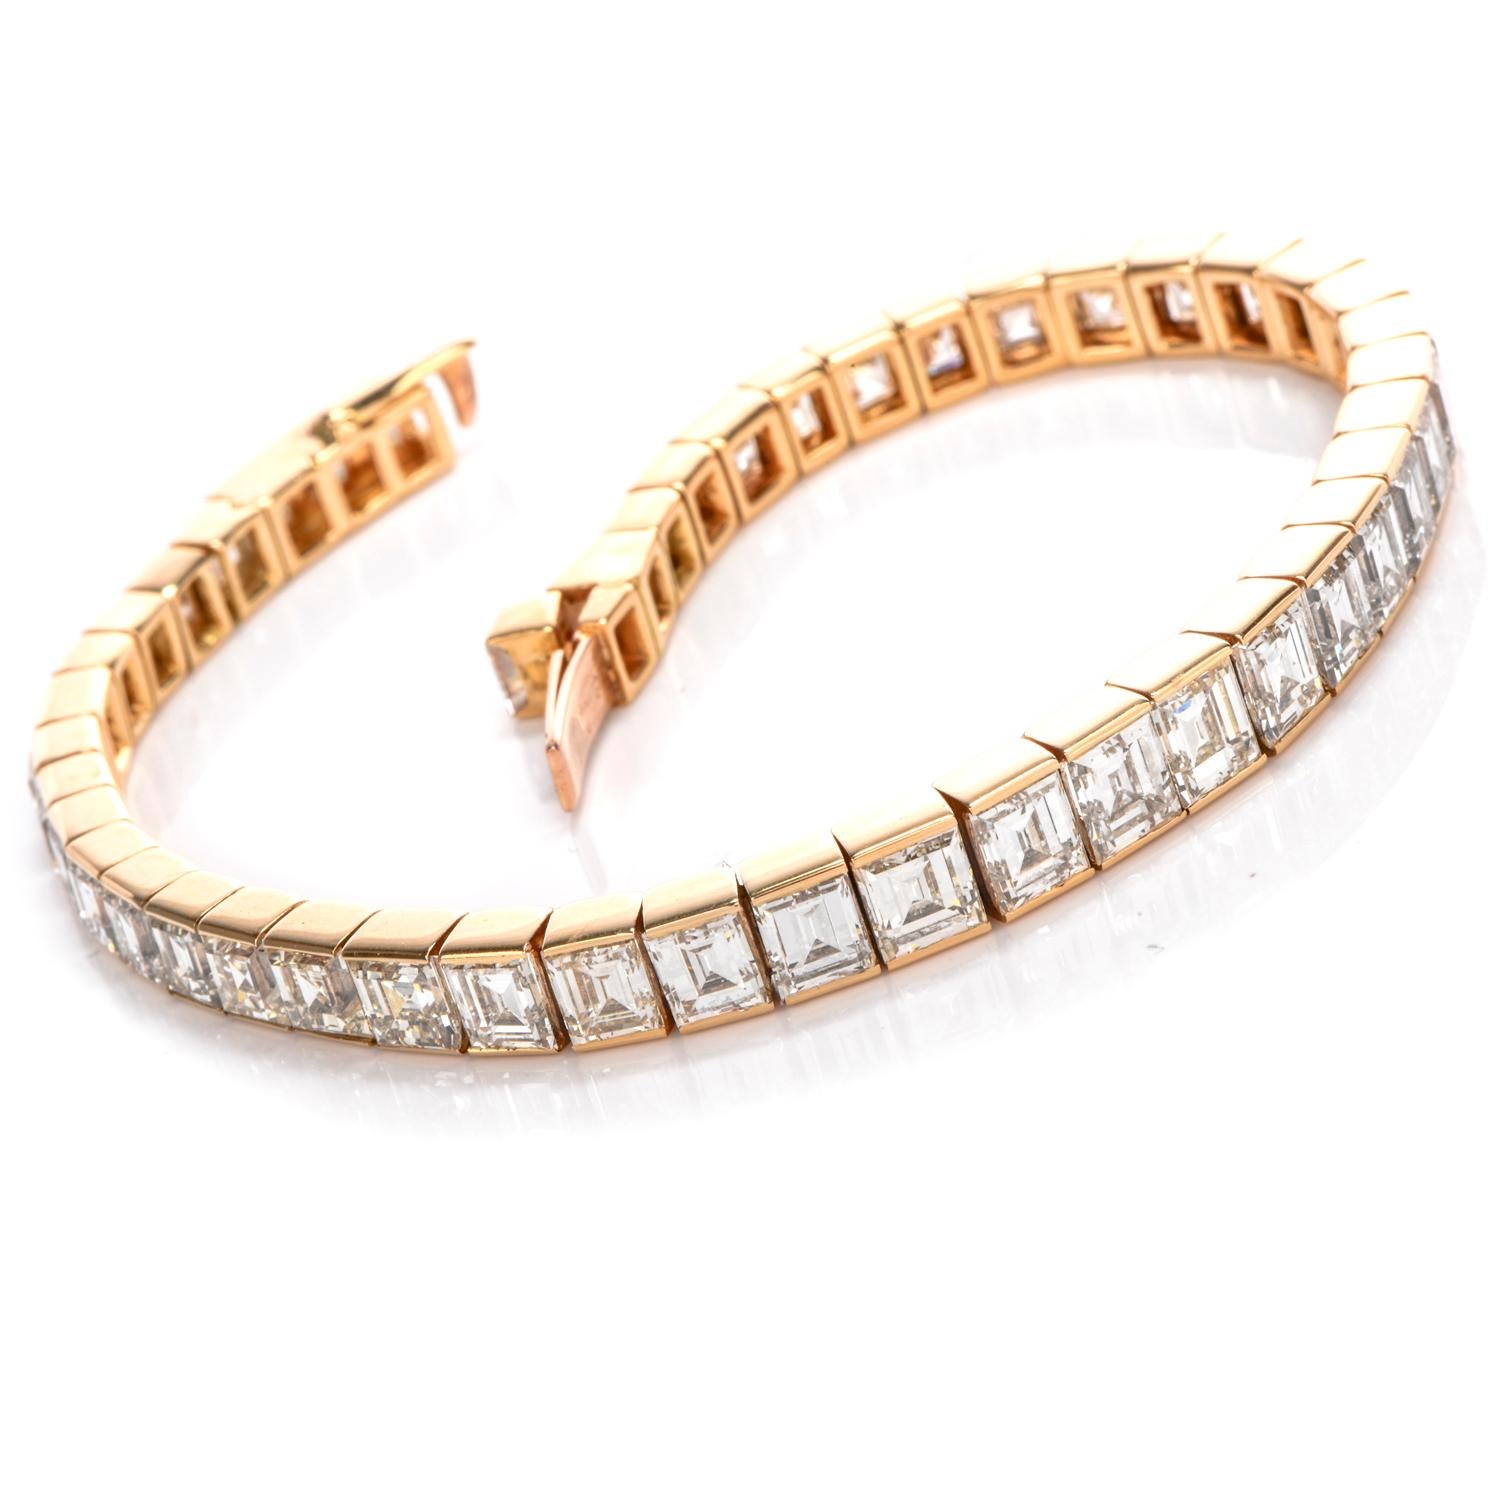 This elegant 1980's Cartier line bracelet has channelled High qiality Asscher Cut Dimaonds throughout with a slight taper from center to ends and contains a hidden lockingcatch with safety. The diamonds weigh approximately approximately 24.00 carats